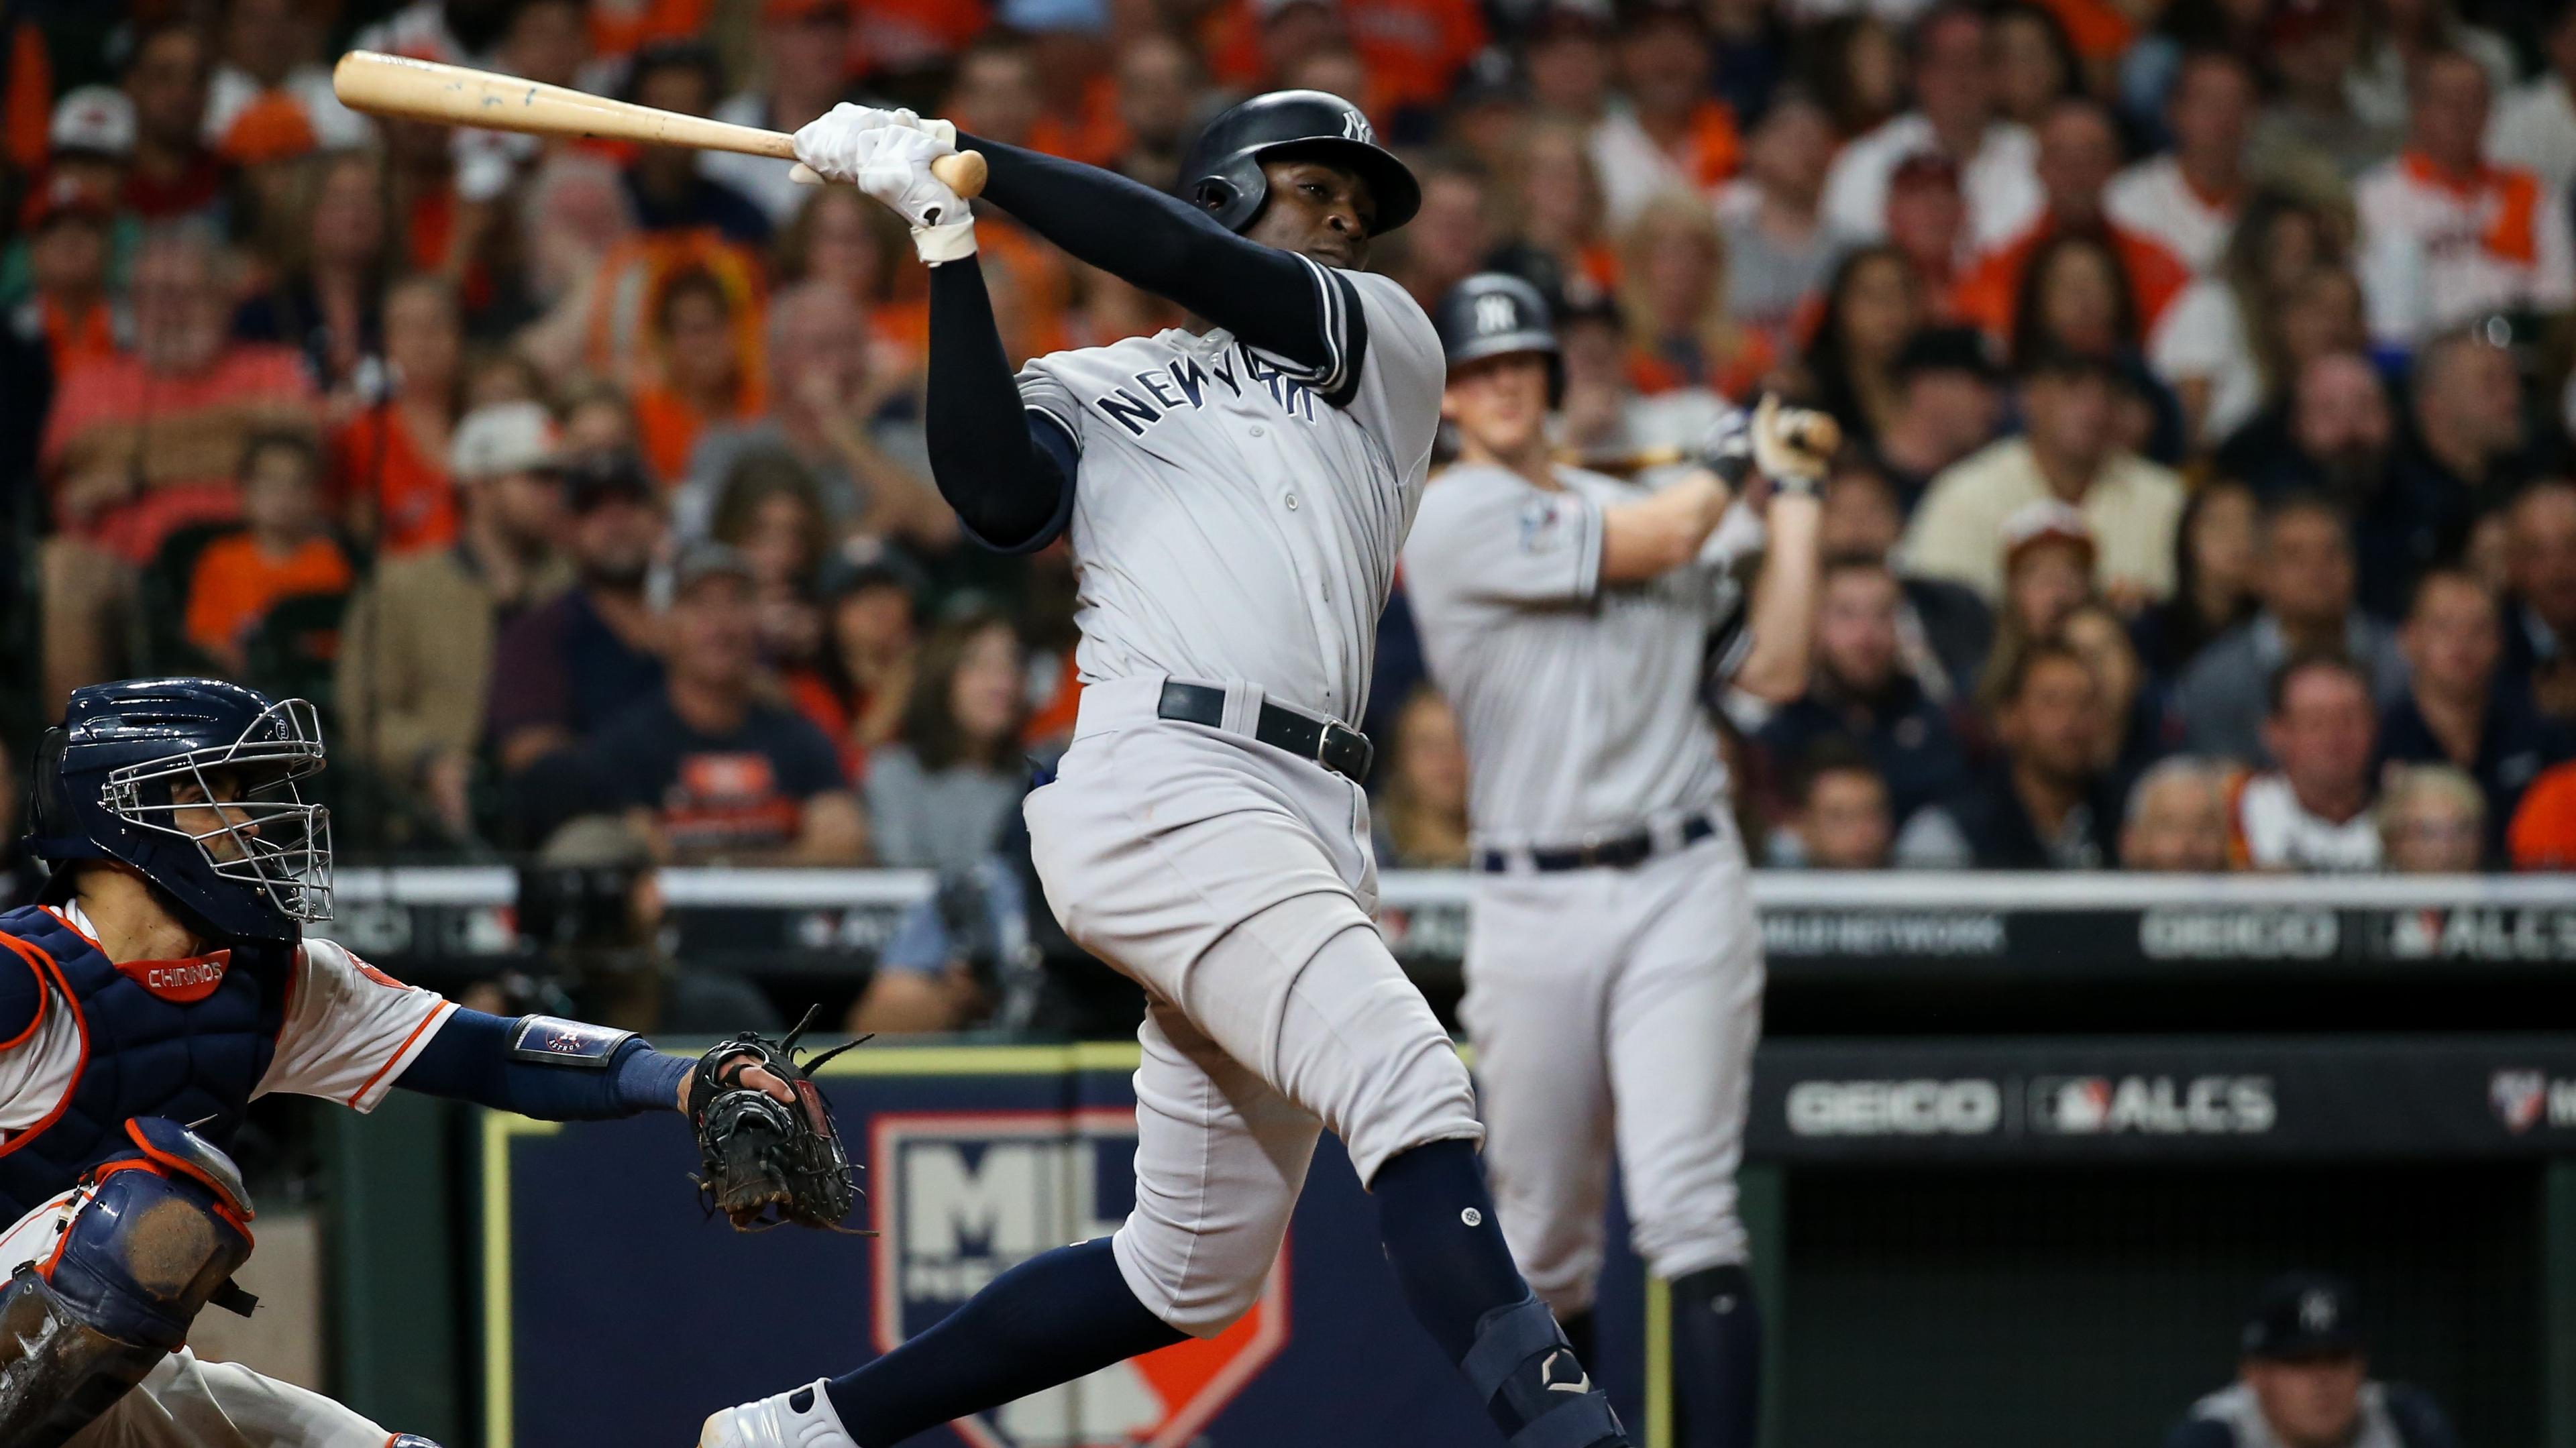 New York Yankees shortstop Didi Gregorius (18) singles against the Houston Astros in the seventh inning in game one of the 2019 ALCS playoff baseball series at Minute Maid Park. / Troy Taormina-USA TODAY Sports